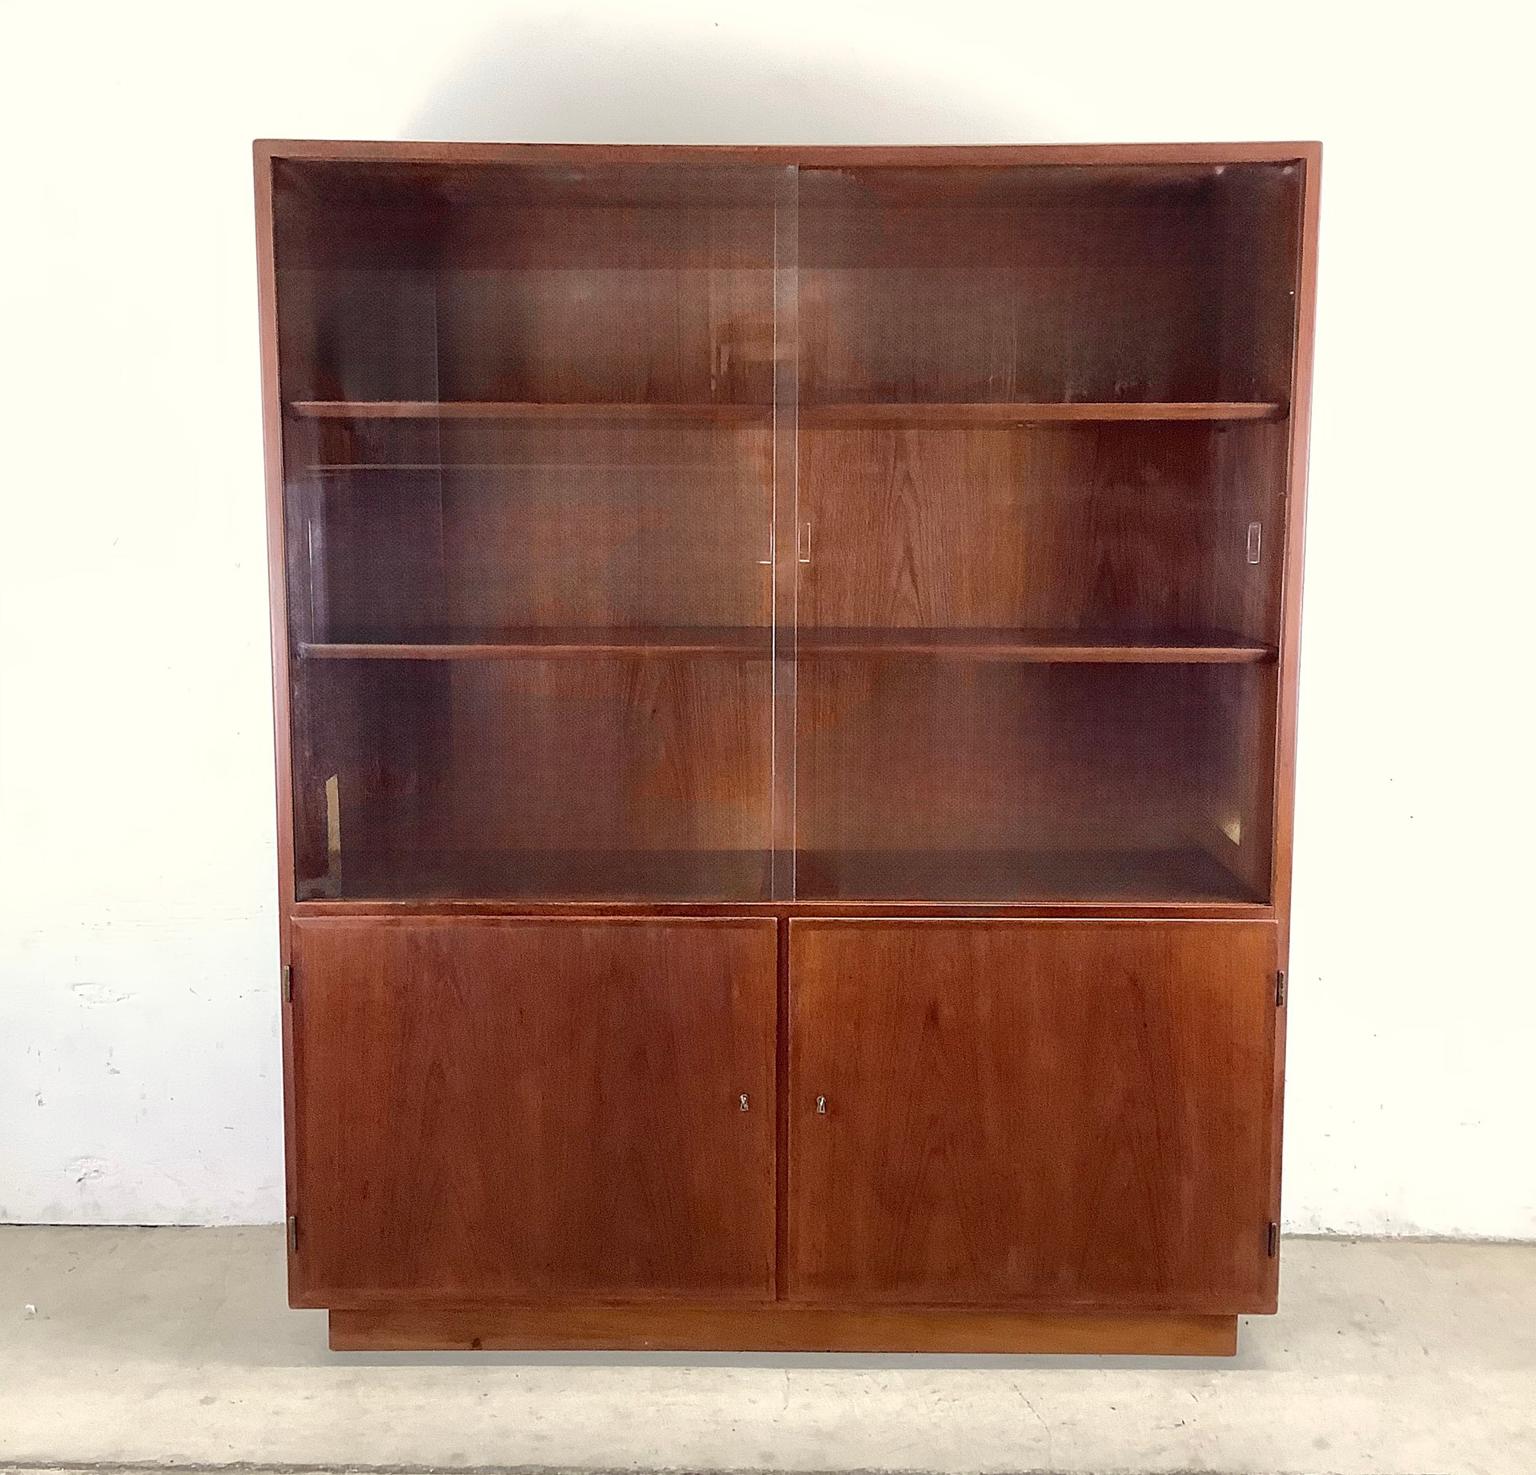 This Mid-Century Glass-Front Teak Display Cabinet Bookcase is a remarkable vintage piece that effortlessly combines style and functionality. This Scandinavian Modern teak cabinet is a timeless vintage treasure that will elevate any interior with its